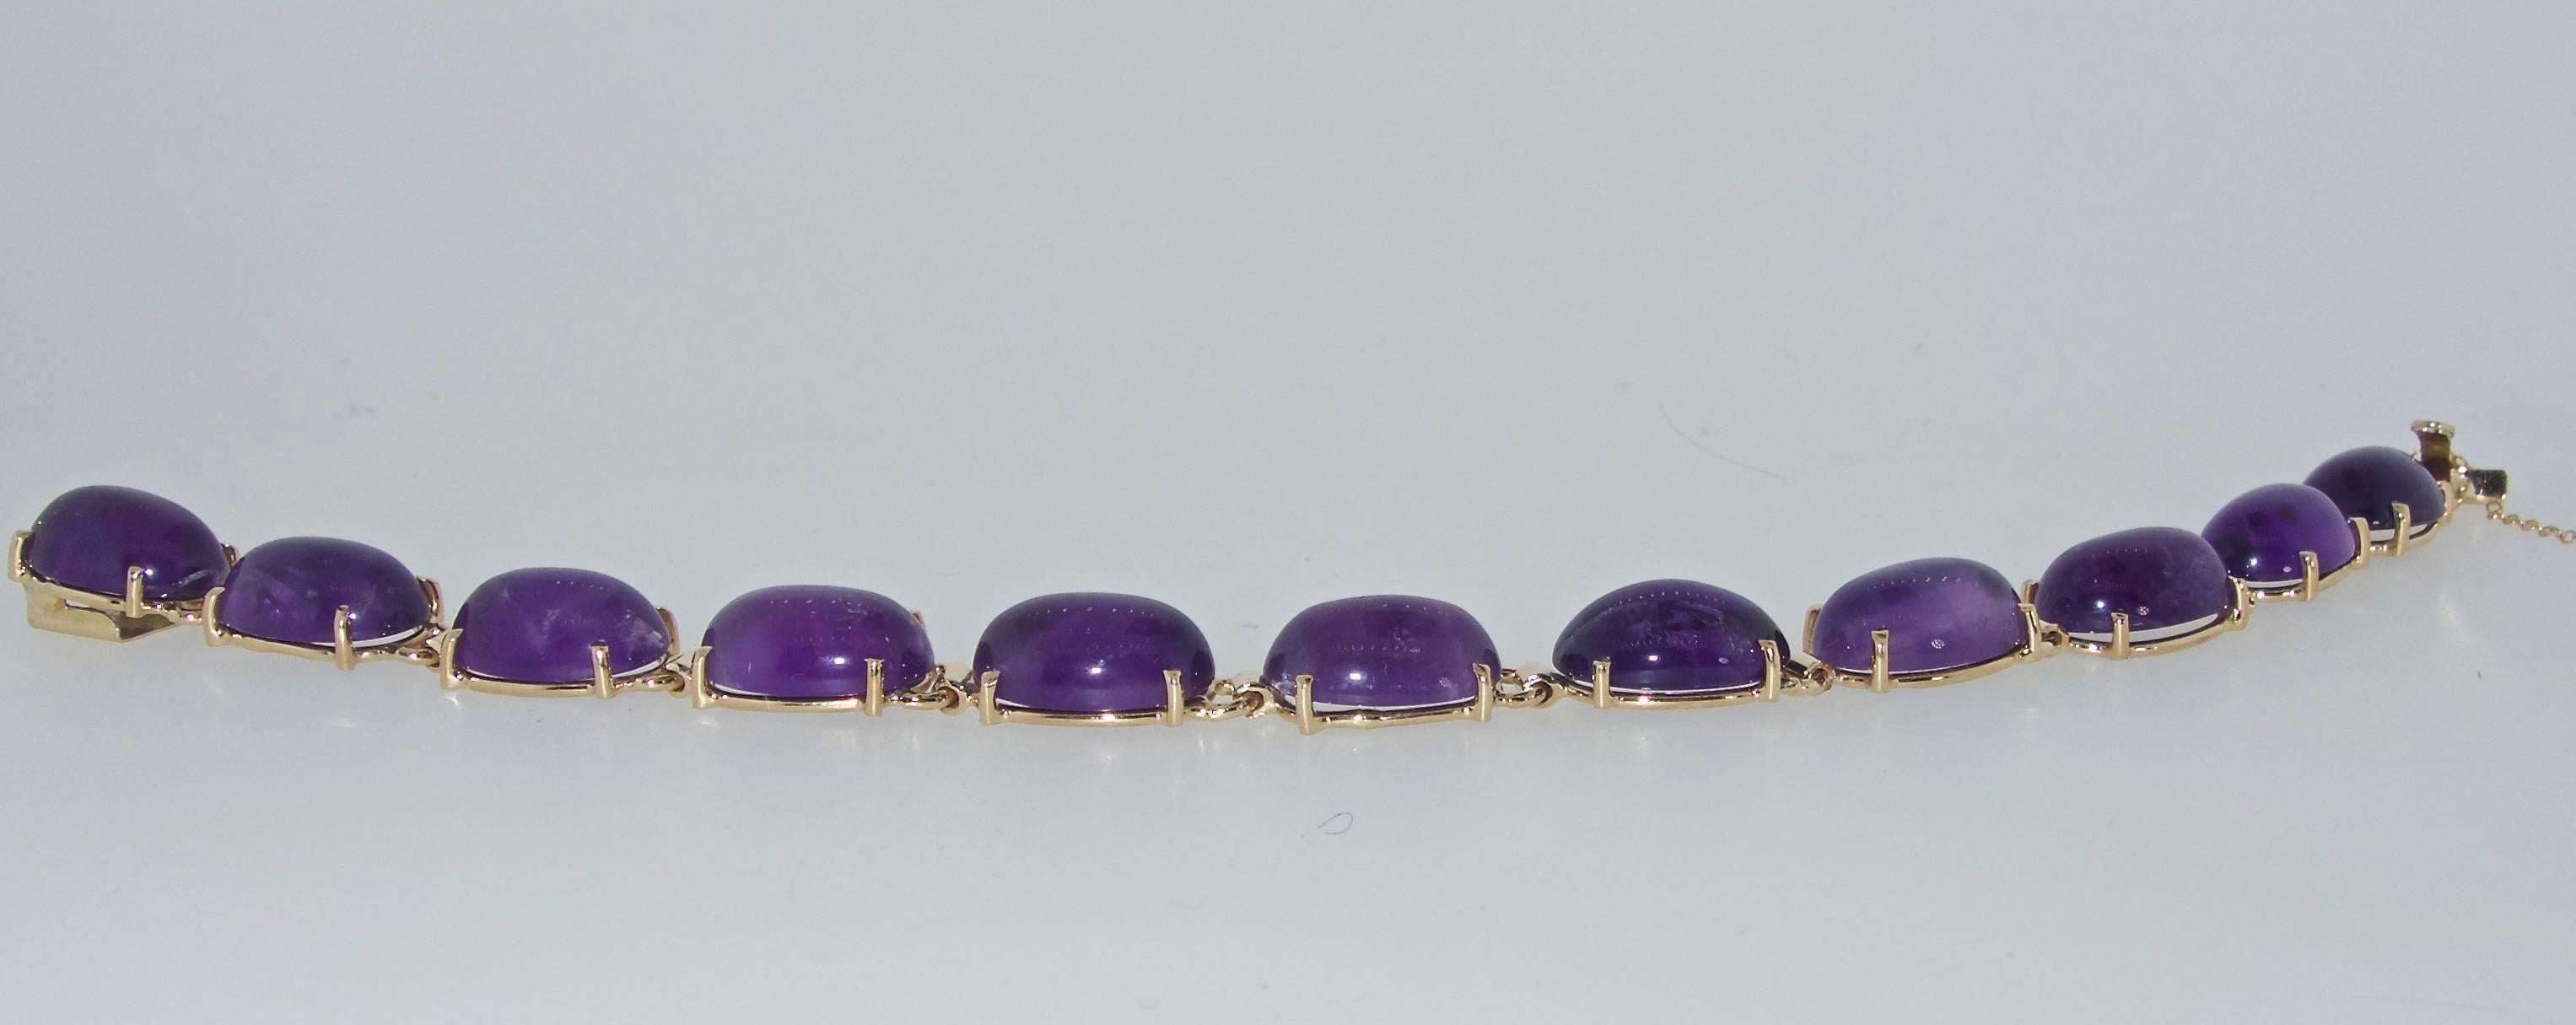 11 fine purple amethysts, cabochon cut, averaging 5.5 cts and totaling approximately 60 cts.  All stones are well matched, vibrant and well set.  Length is 7.25 inches and weighs 20.95 grams.